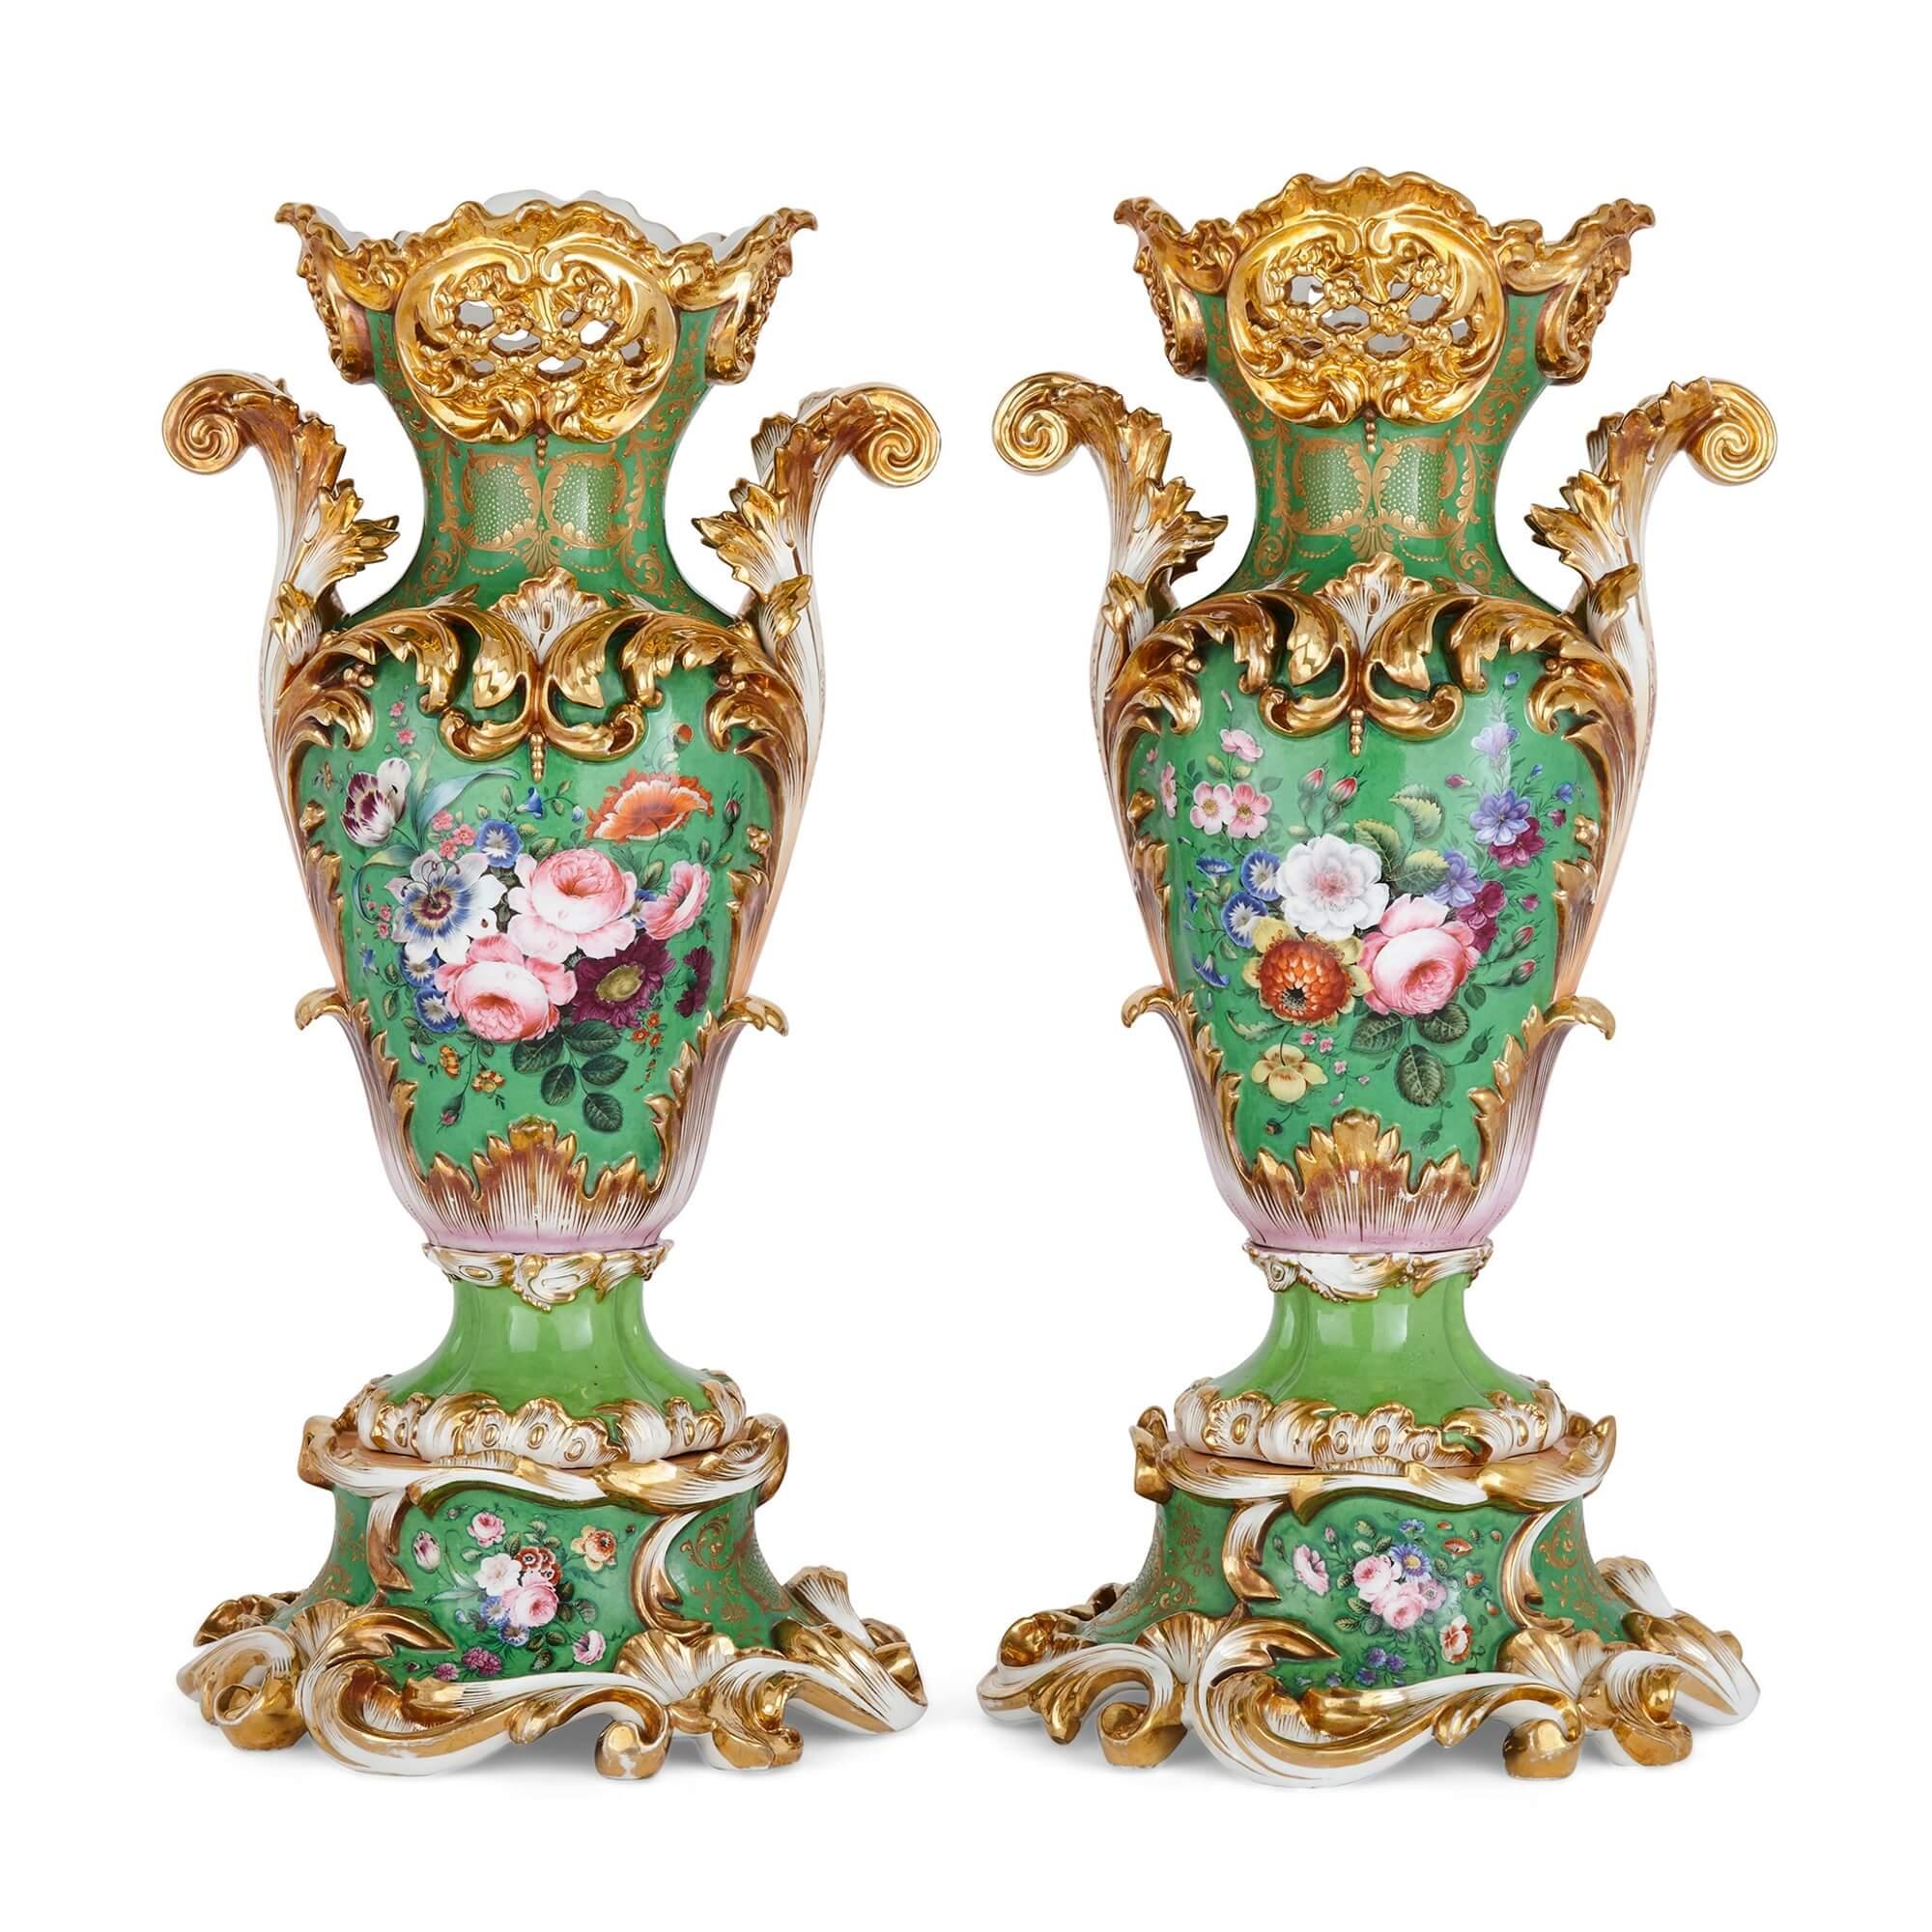 Pair of Large Rococo Porcelain vases with Painted Madonnas and Floral bouquets
English, 19th Century
Height 60cm, width 31cm, depth 26cm

Of flattened baluster form, with trellis-pierced necks and scrolling acanthus handles, these beautiful